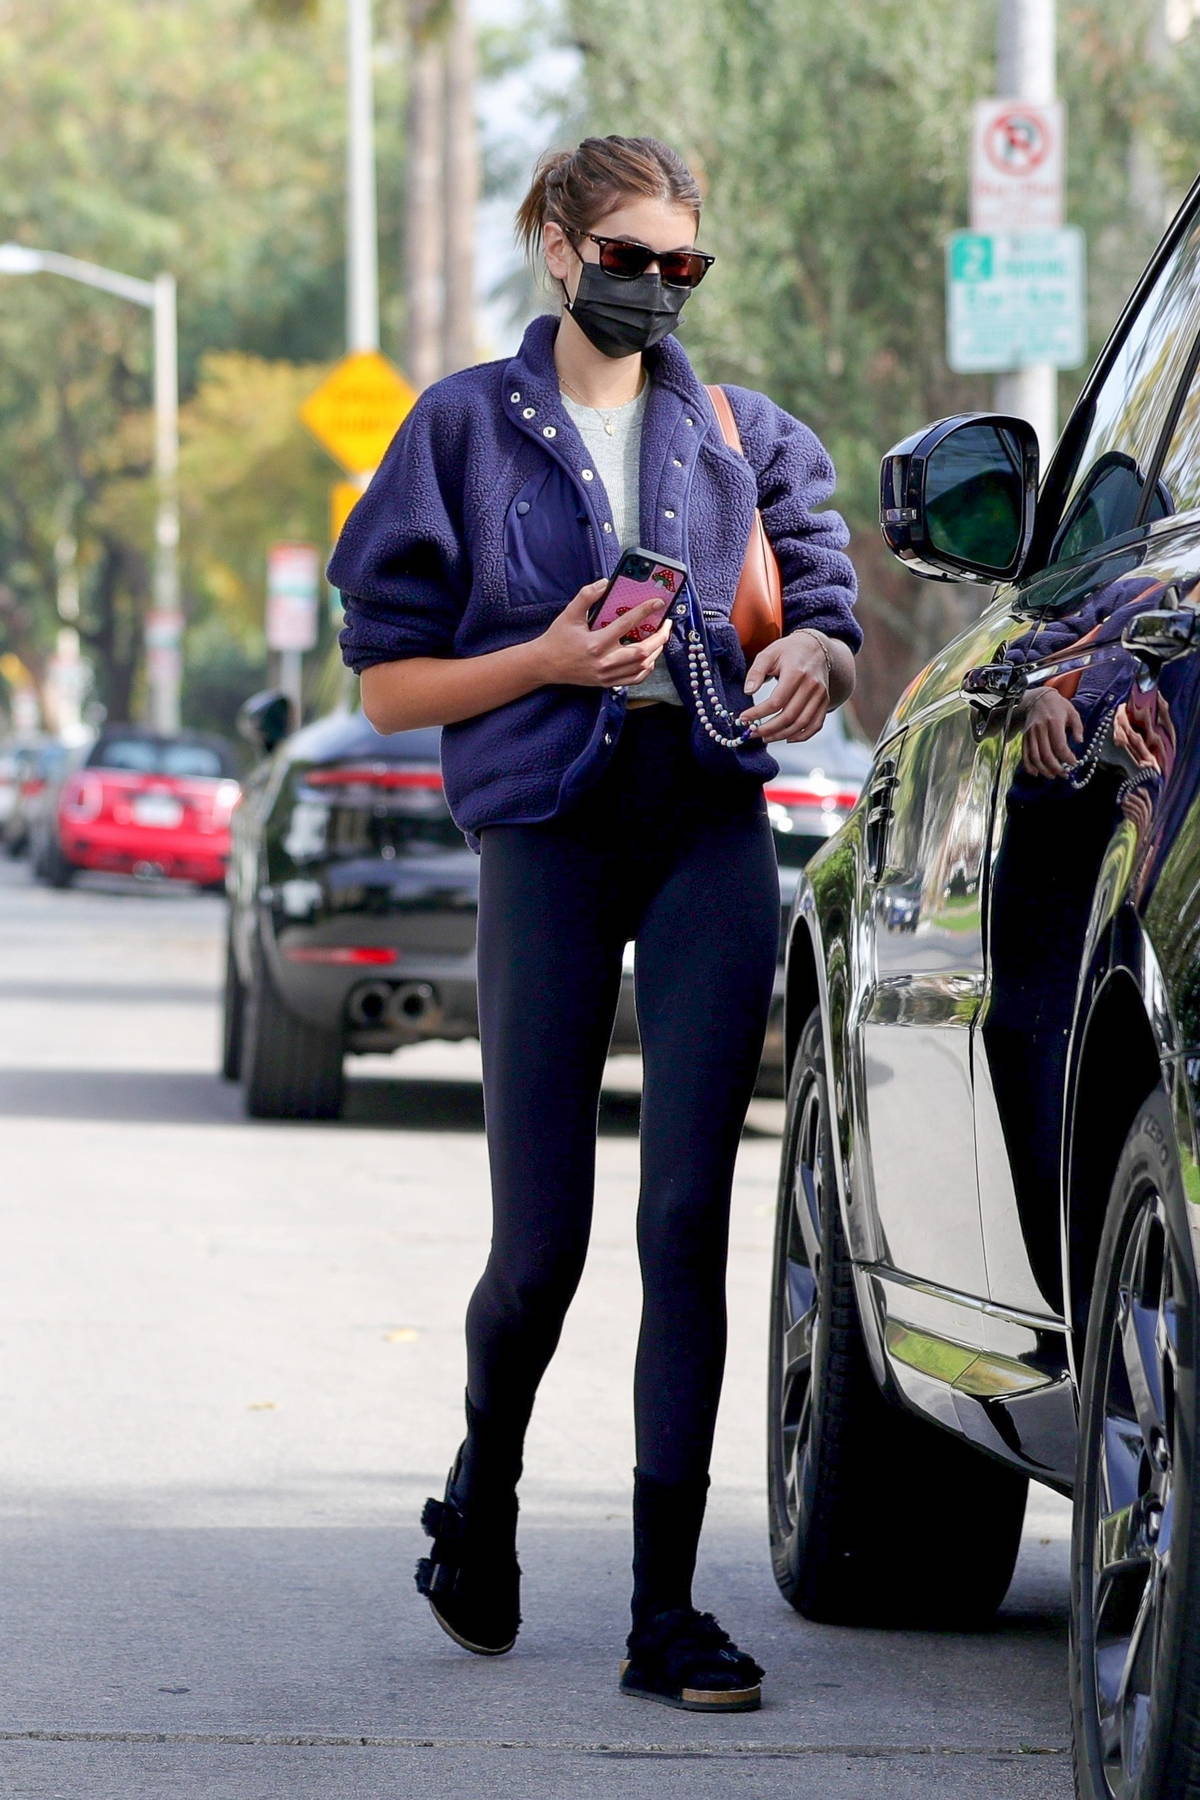 Victoria Justice shows off her toned figure in a sports bra and legging  shorts during a